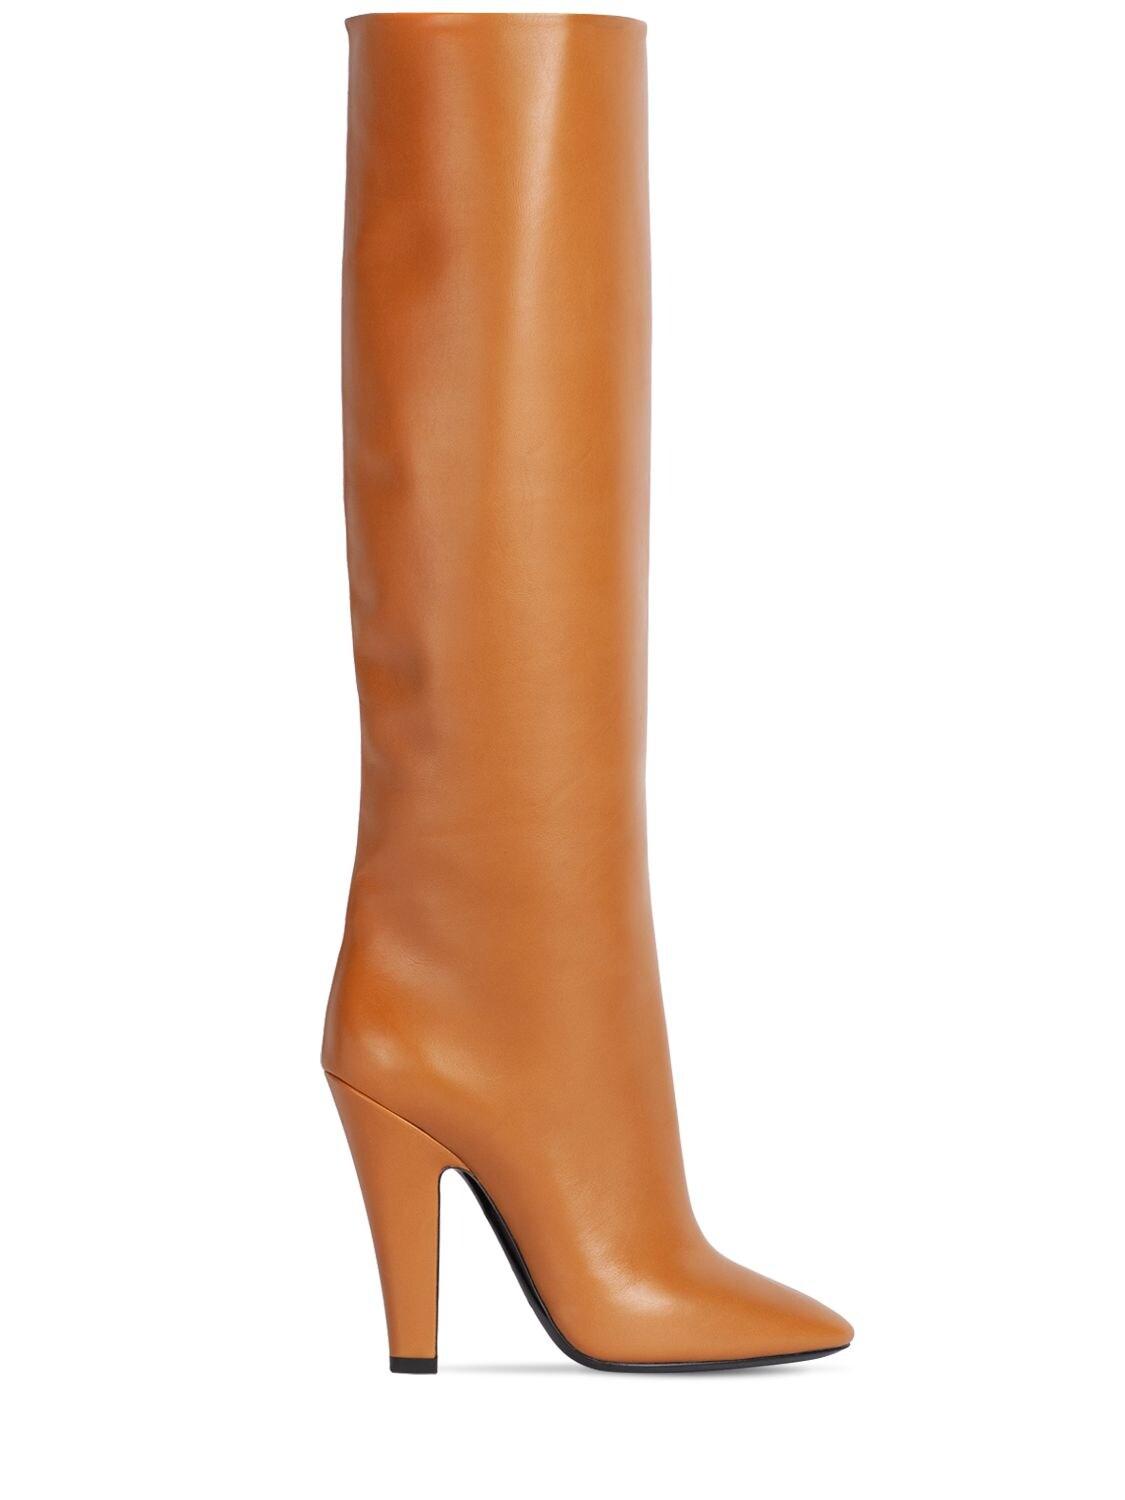 Saint Laurent 110mm 68 Tube Leather Tall Boots in Brown | Lyst